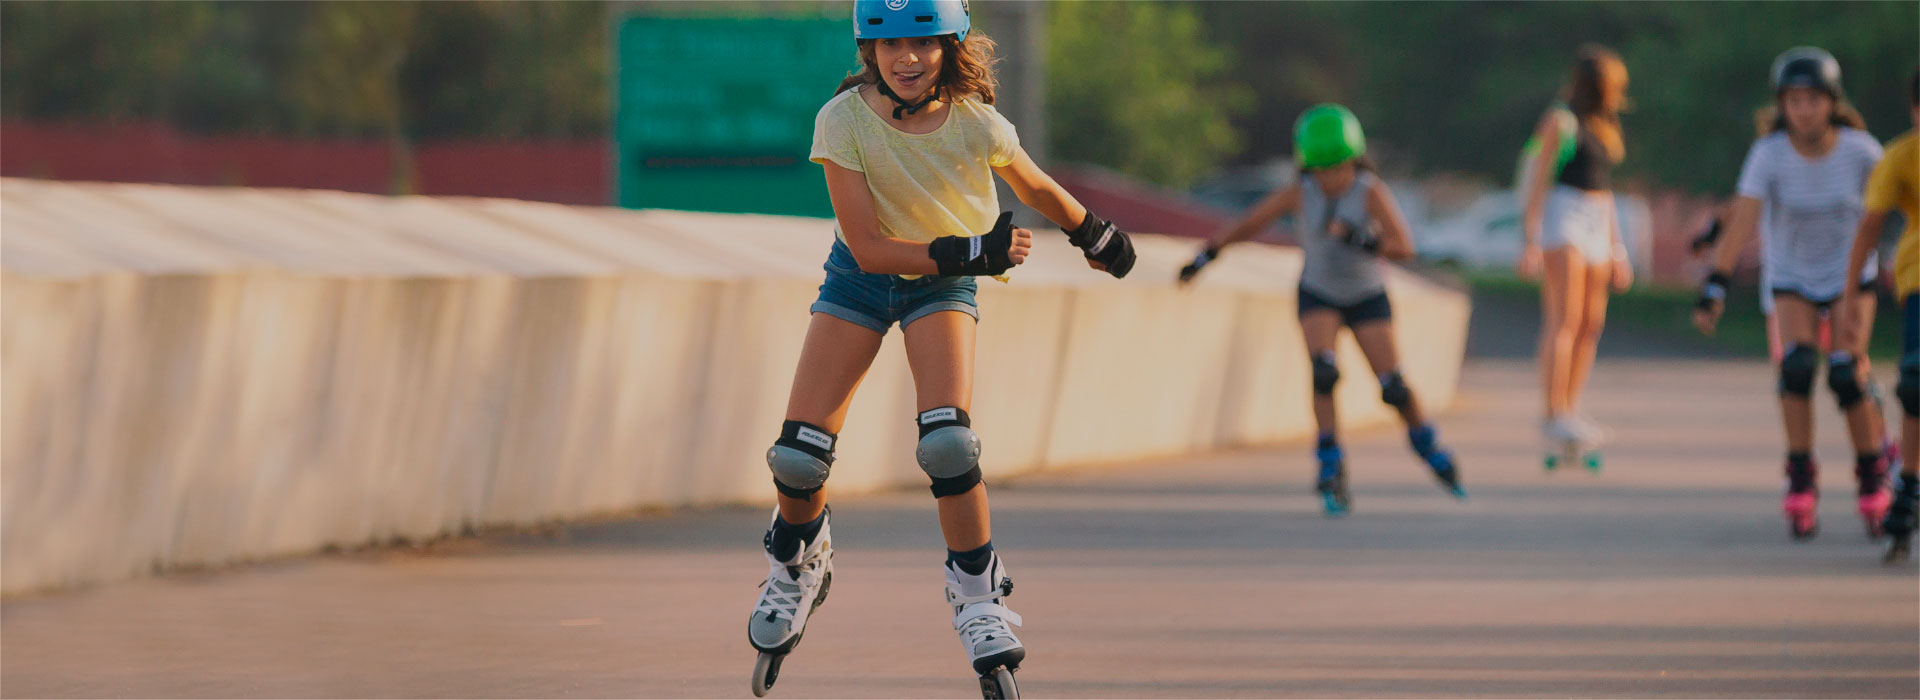 Young girl with a smile on her face rolls on Powerslide inline kids skates with other children skating in the background